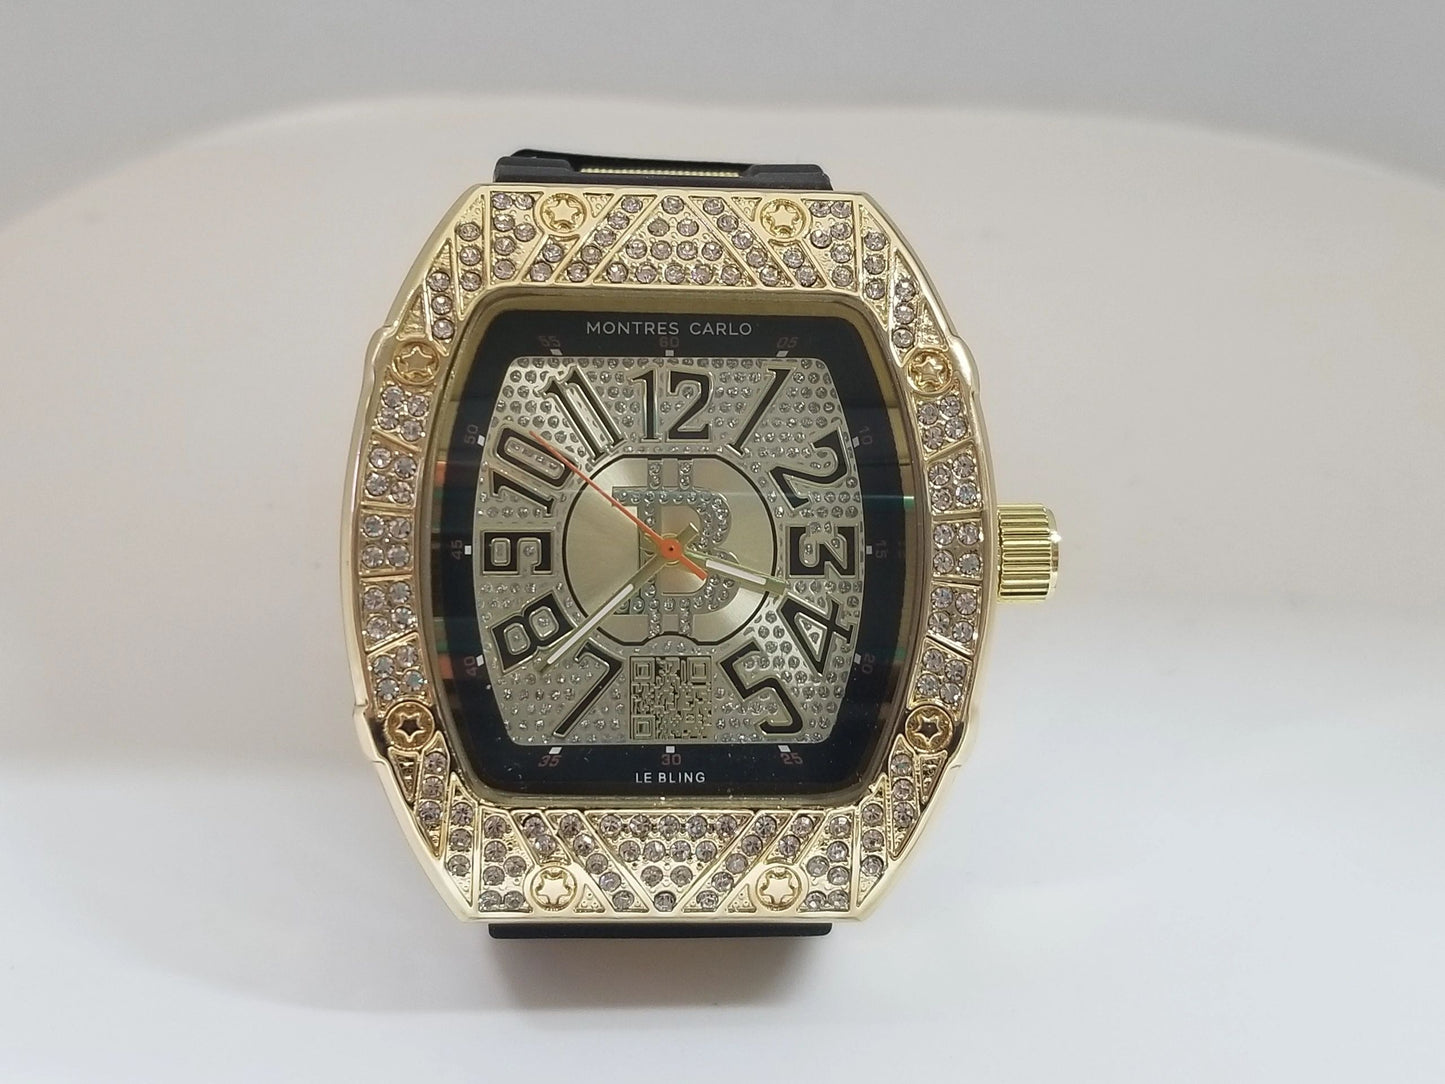 Montres Carlo Gold Stainless Steel/Silicon Jewel Inset Wristwatch